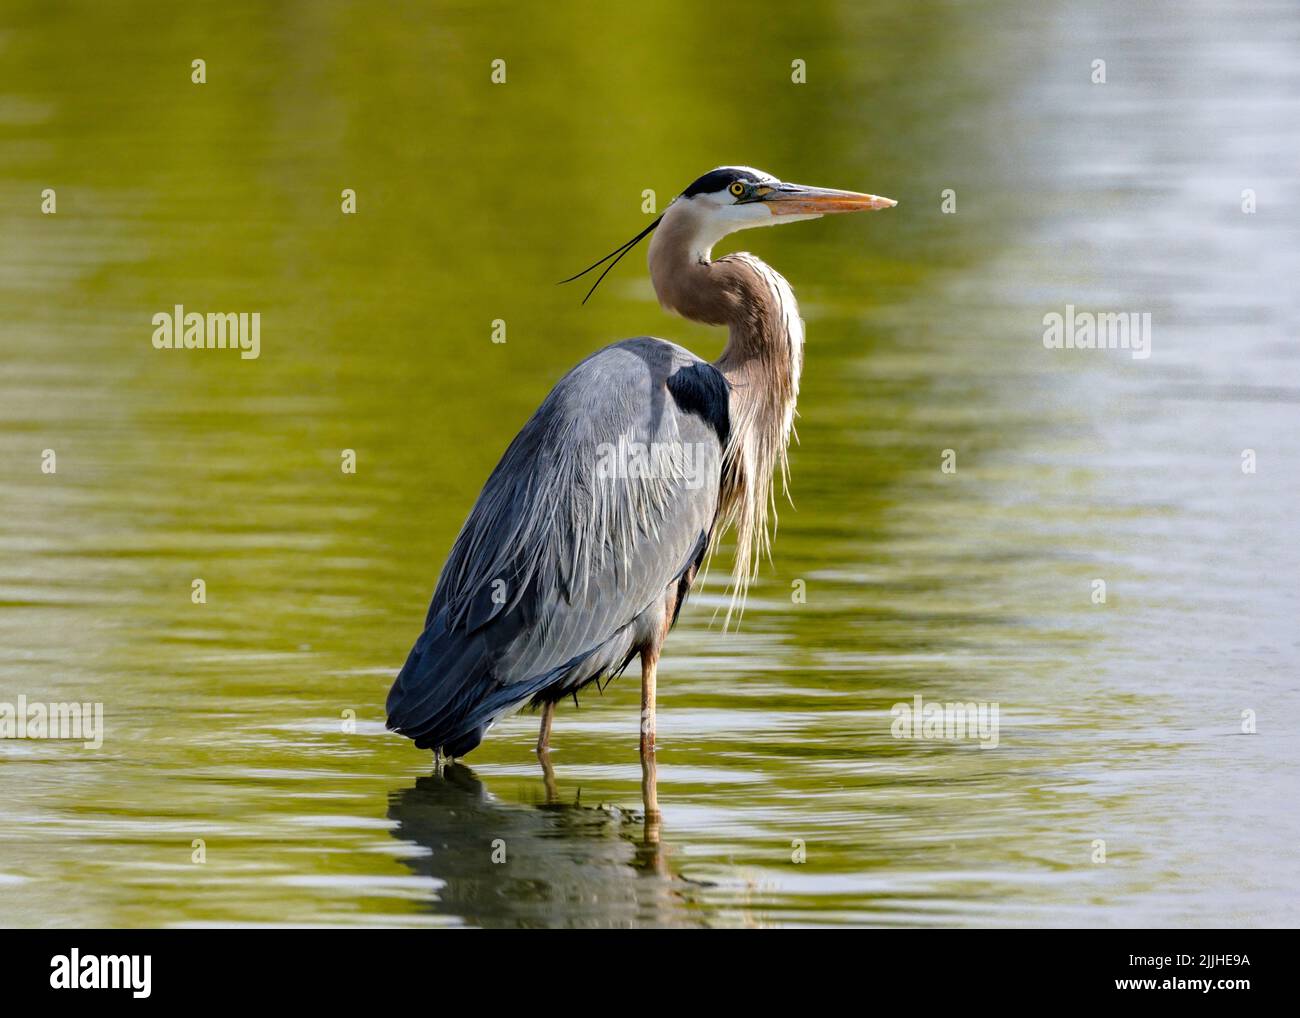 A Great Blue Heron looks skyward while wading in a golden green pond. Stock Photo